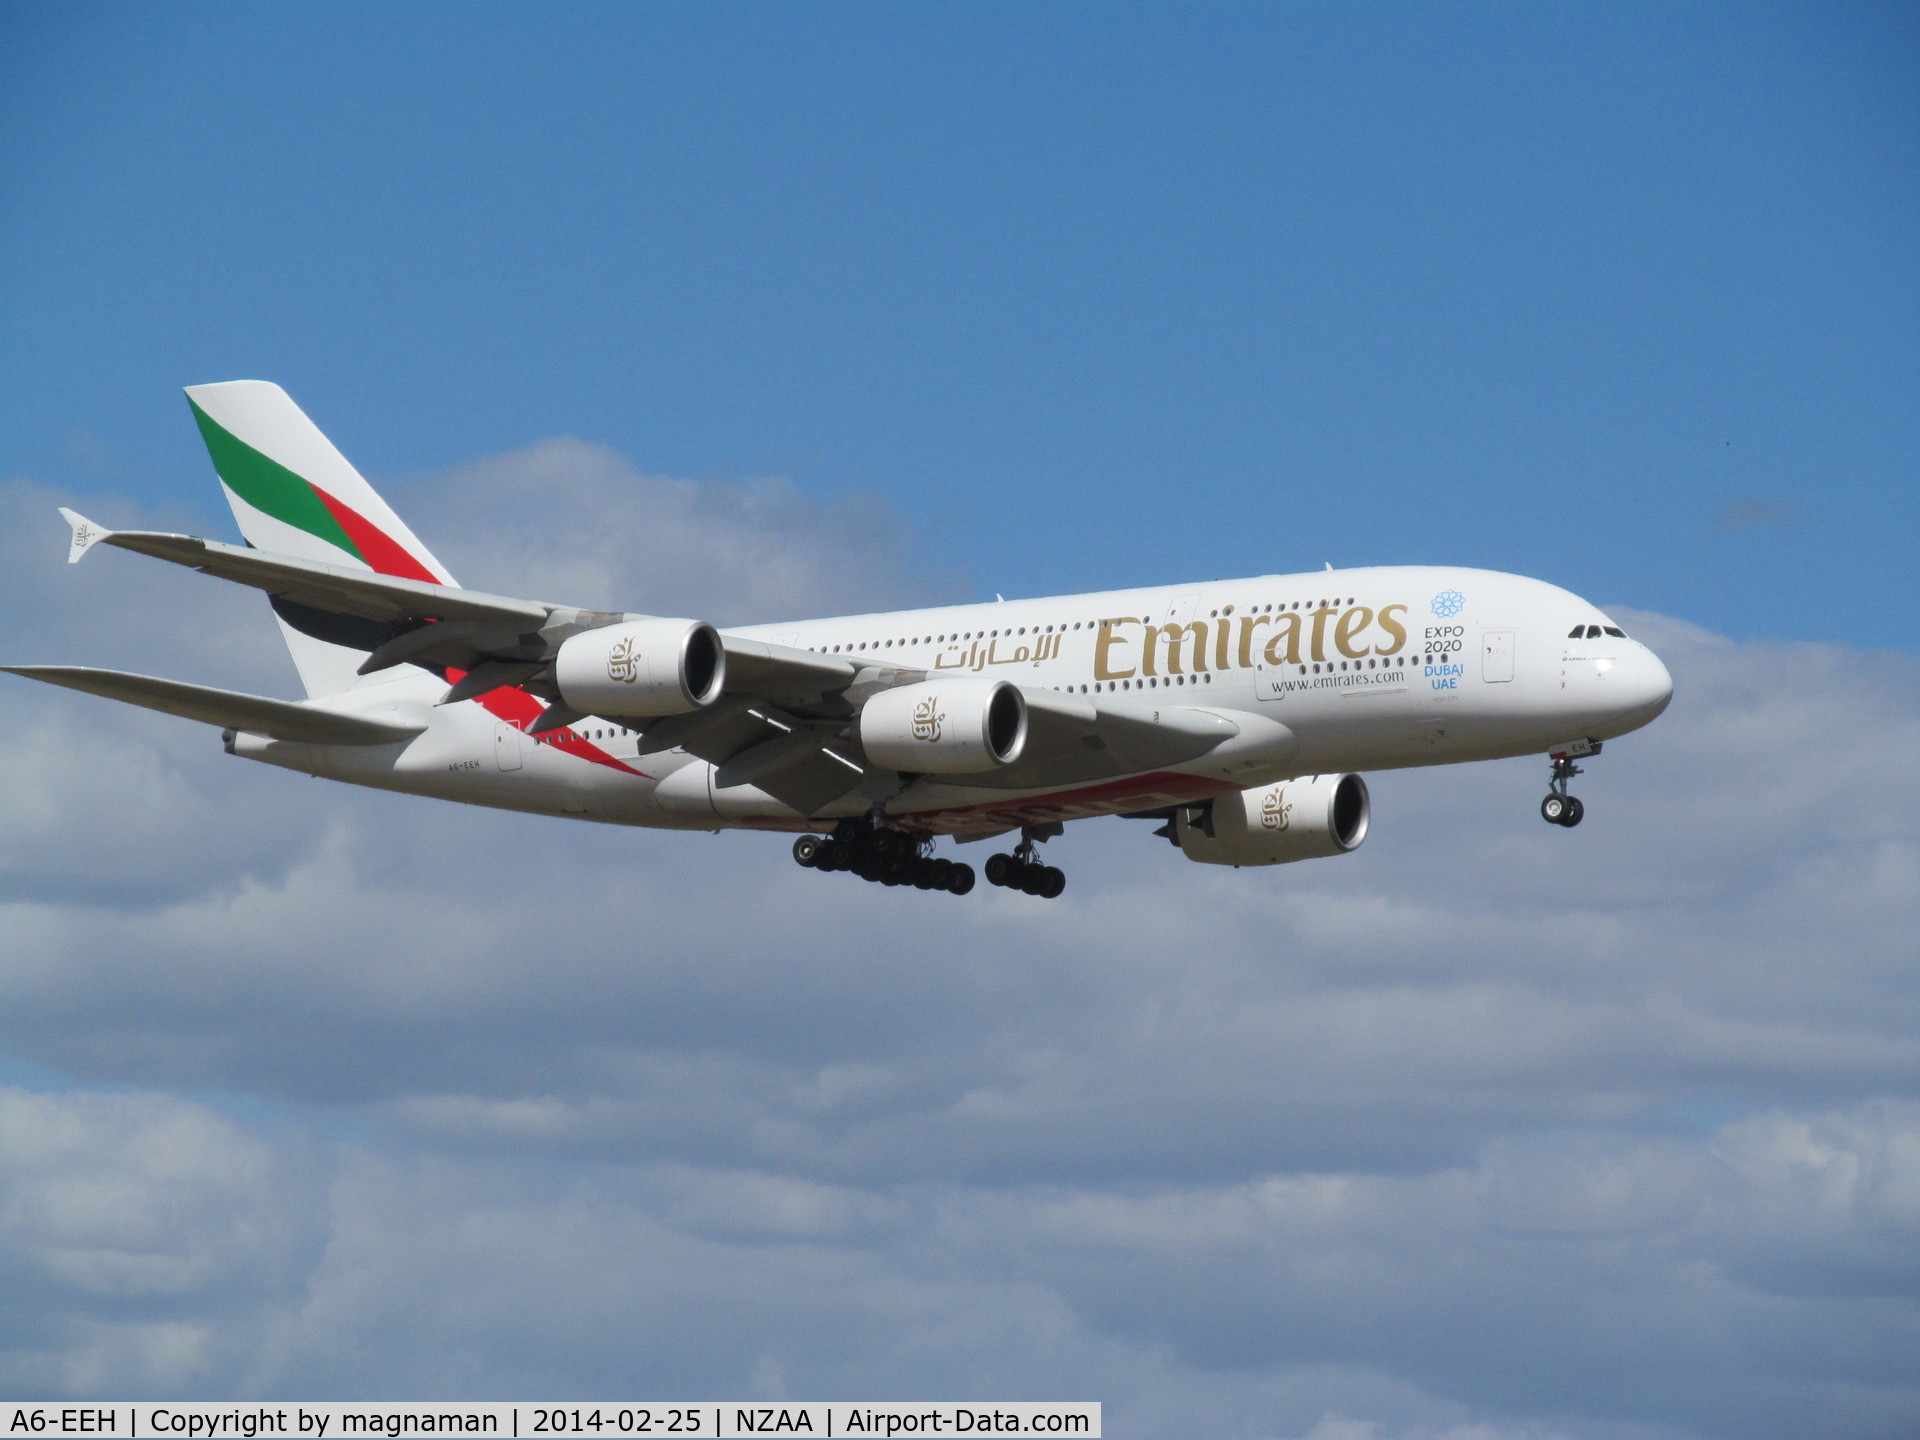 A6-EEH, 2013 Airbus A380-861 C/N 119, nice sunny shot on landing